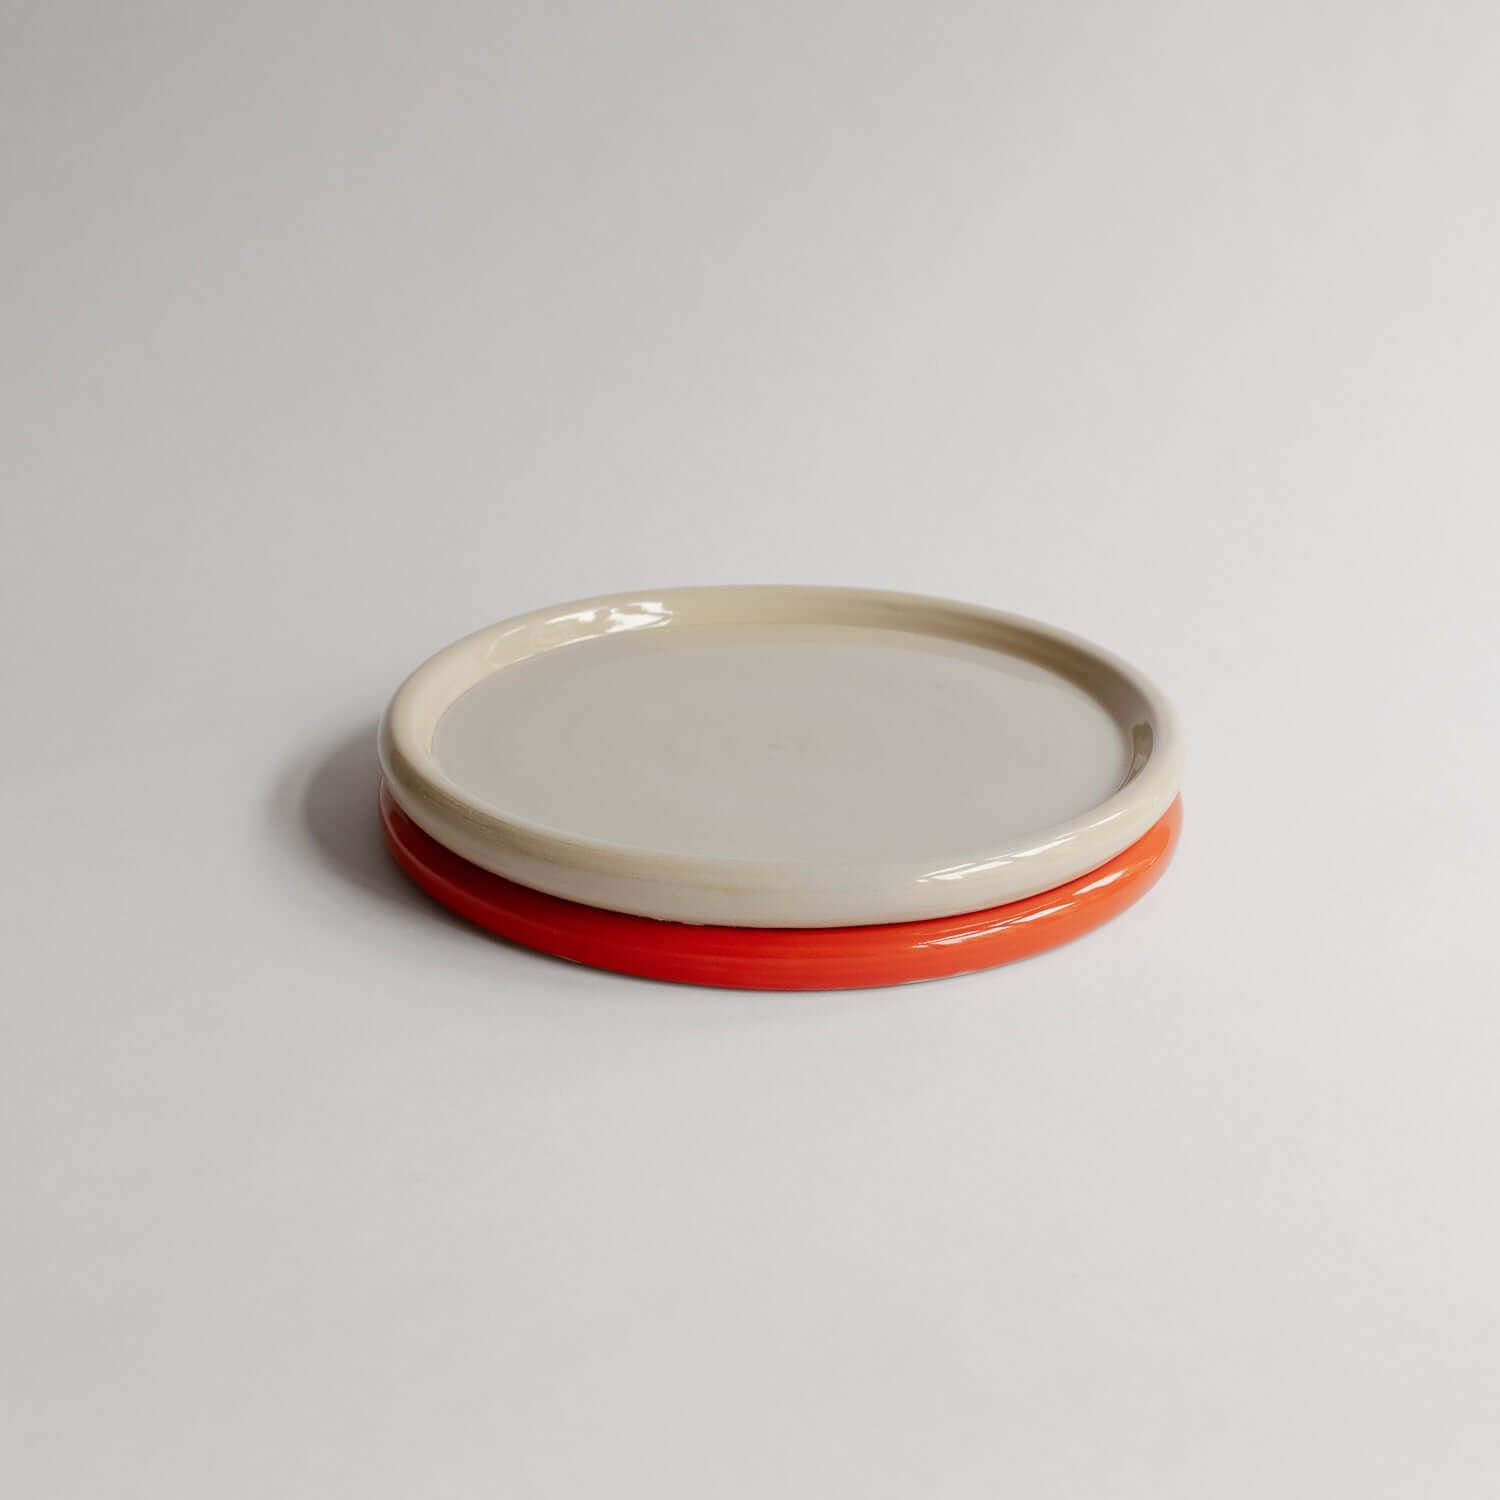 Aleah PlateDiameter — 19 cmHeight — 1,5 cm The Aleah Plate Set includes a red and creme plate, perfect for adding a touch of color to your table setting. Crafted from durable grey stoneware clay and coated with food safe glazes, this piece boasts a fully